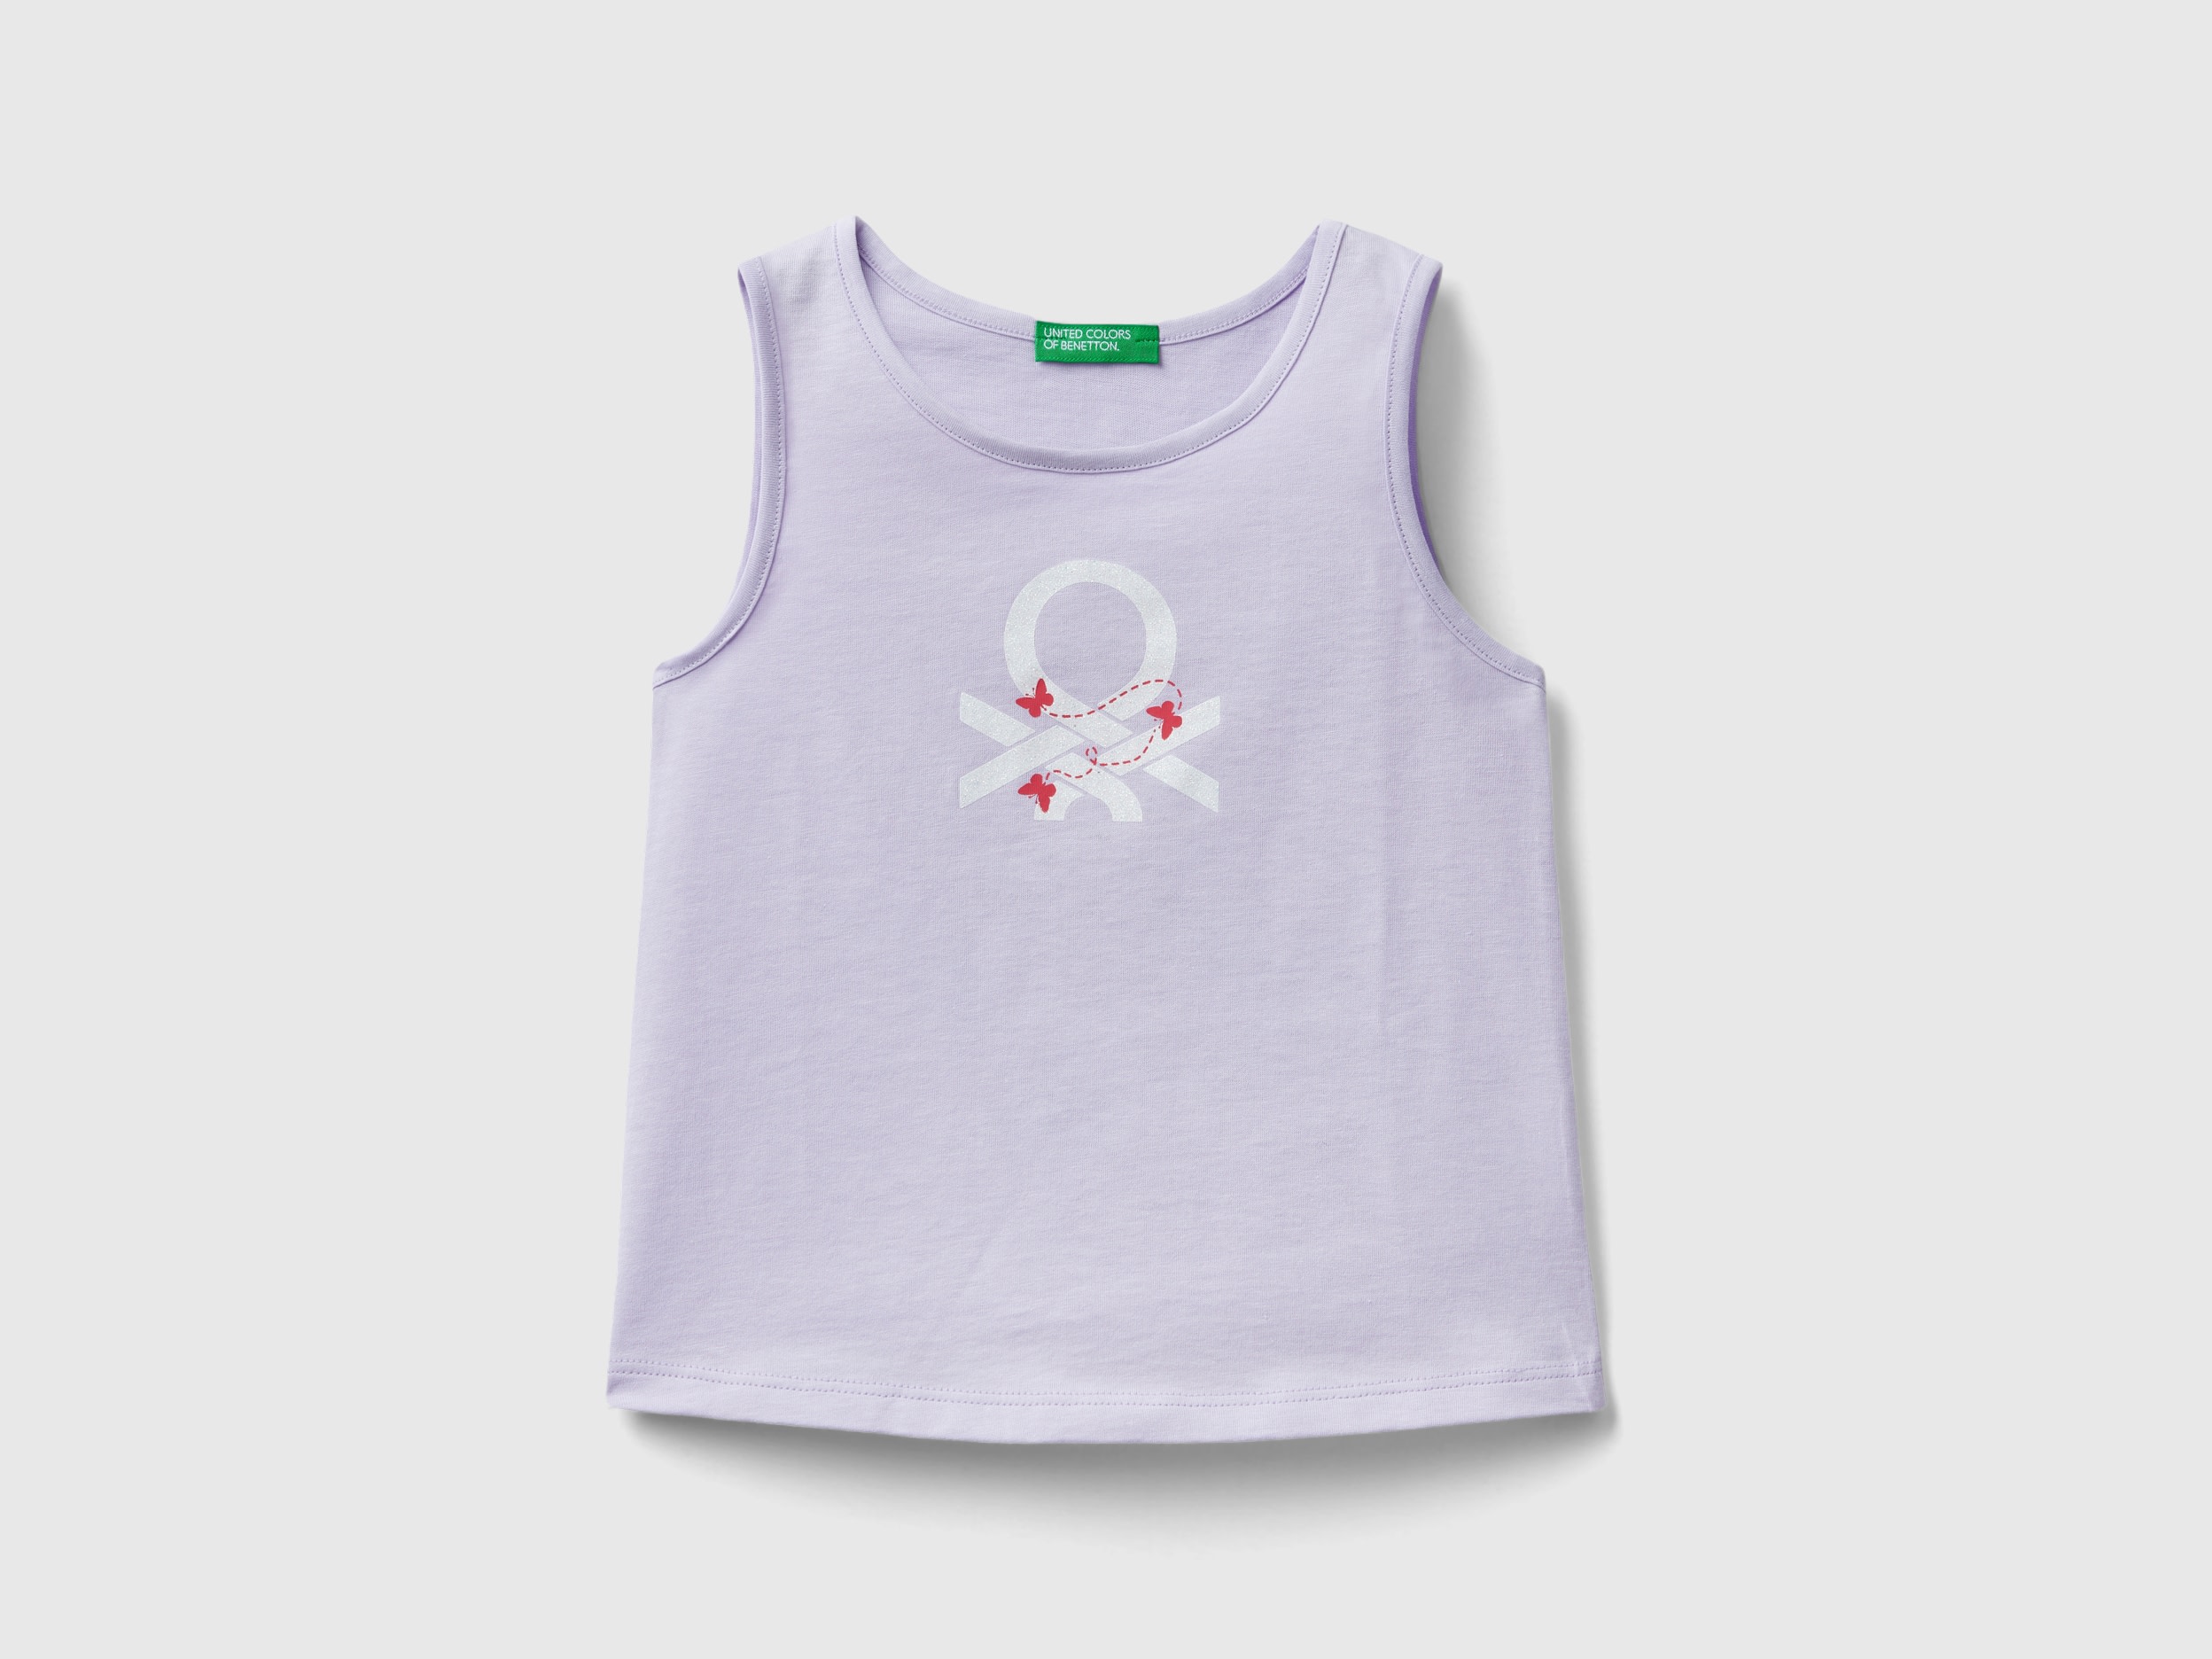 Image of Benetton, Tank Top In Organic Cotton, size 116, Lilac, Kids